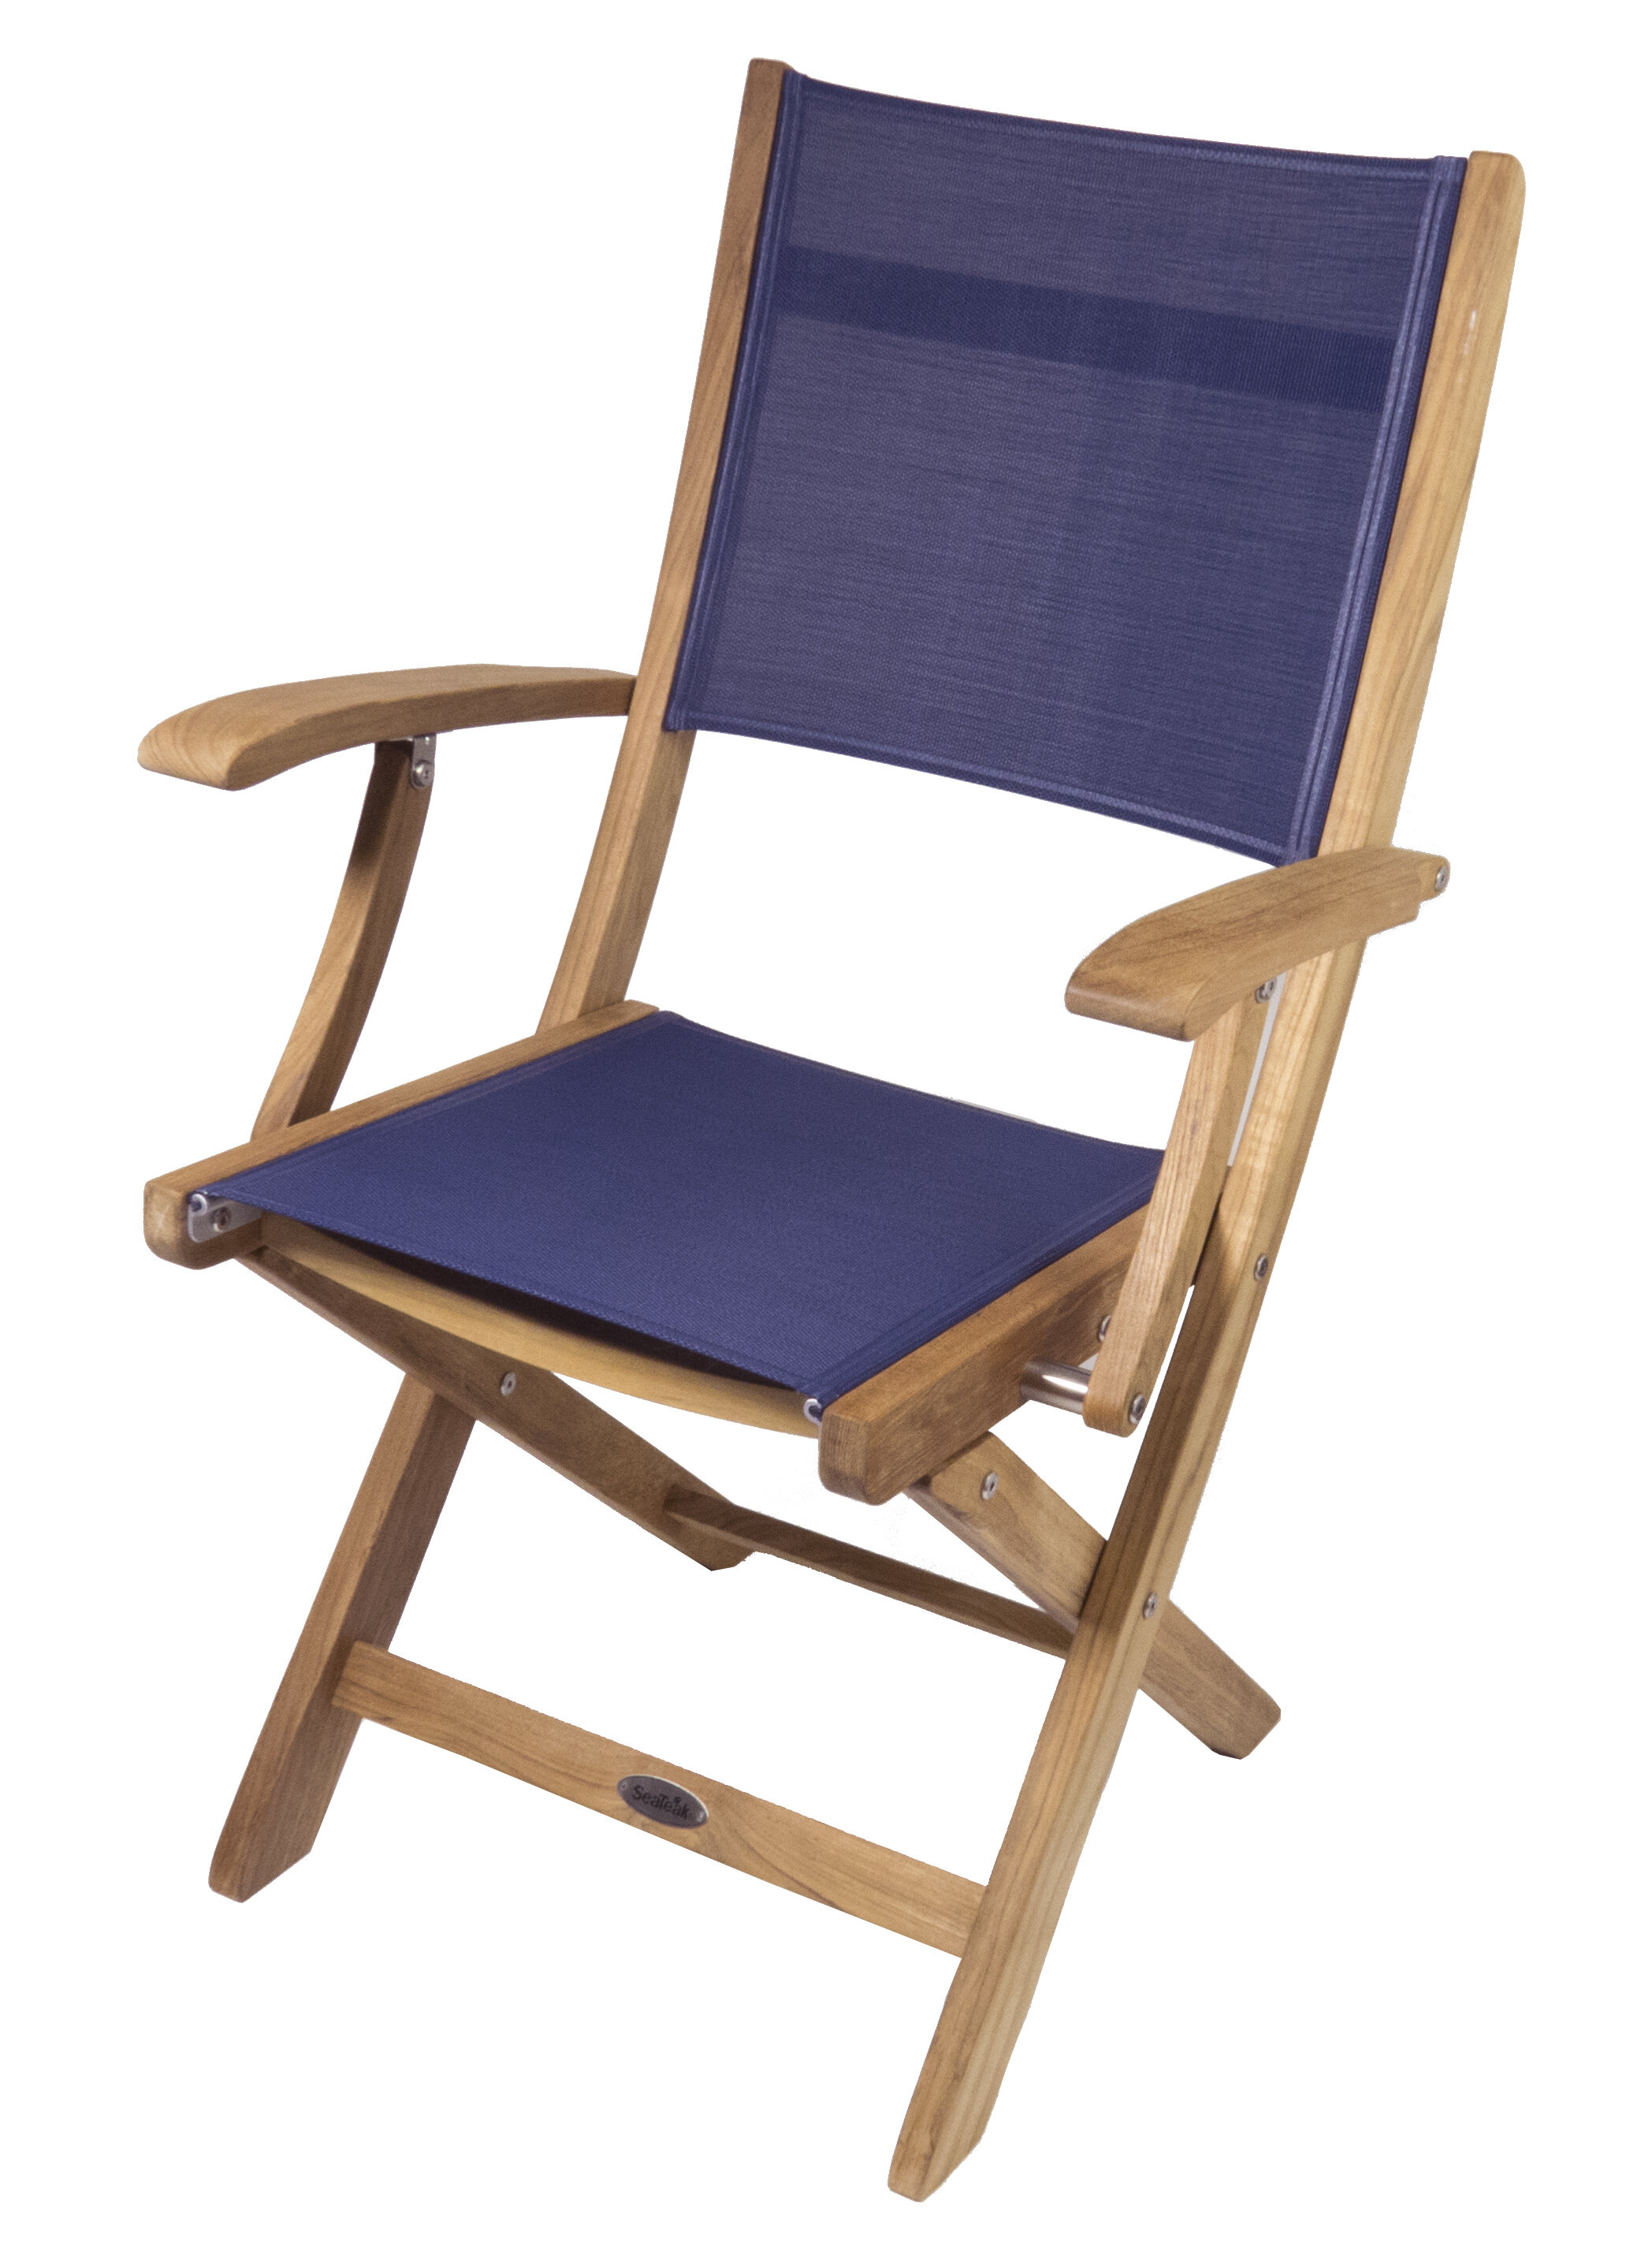 Designed for the outdoors, the teak Weatherly chair is a comfortable seat f...